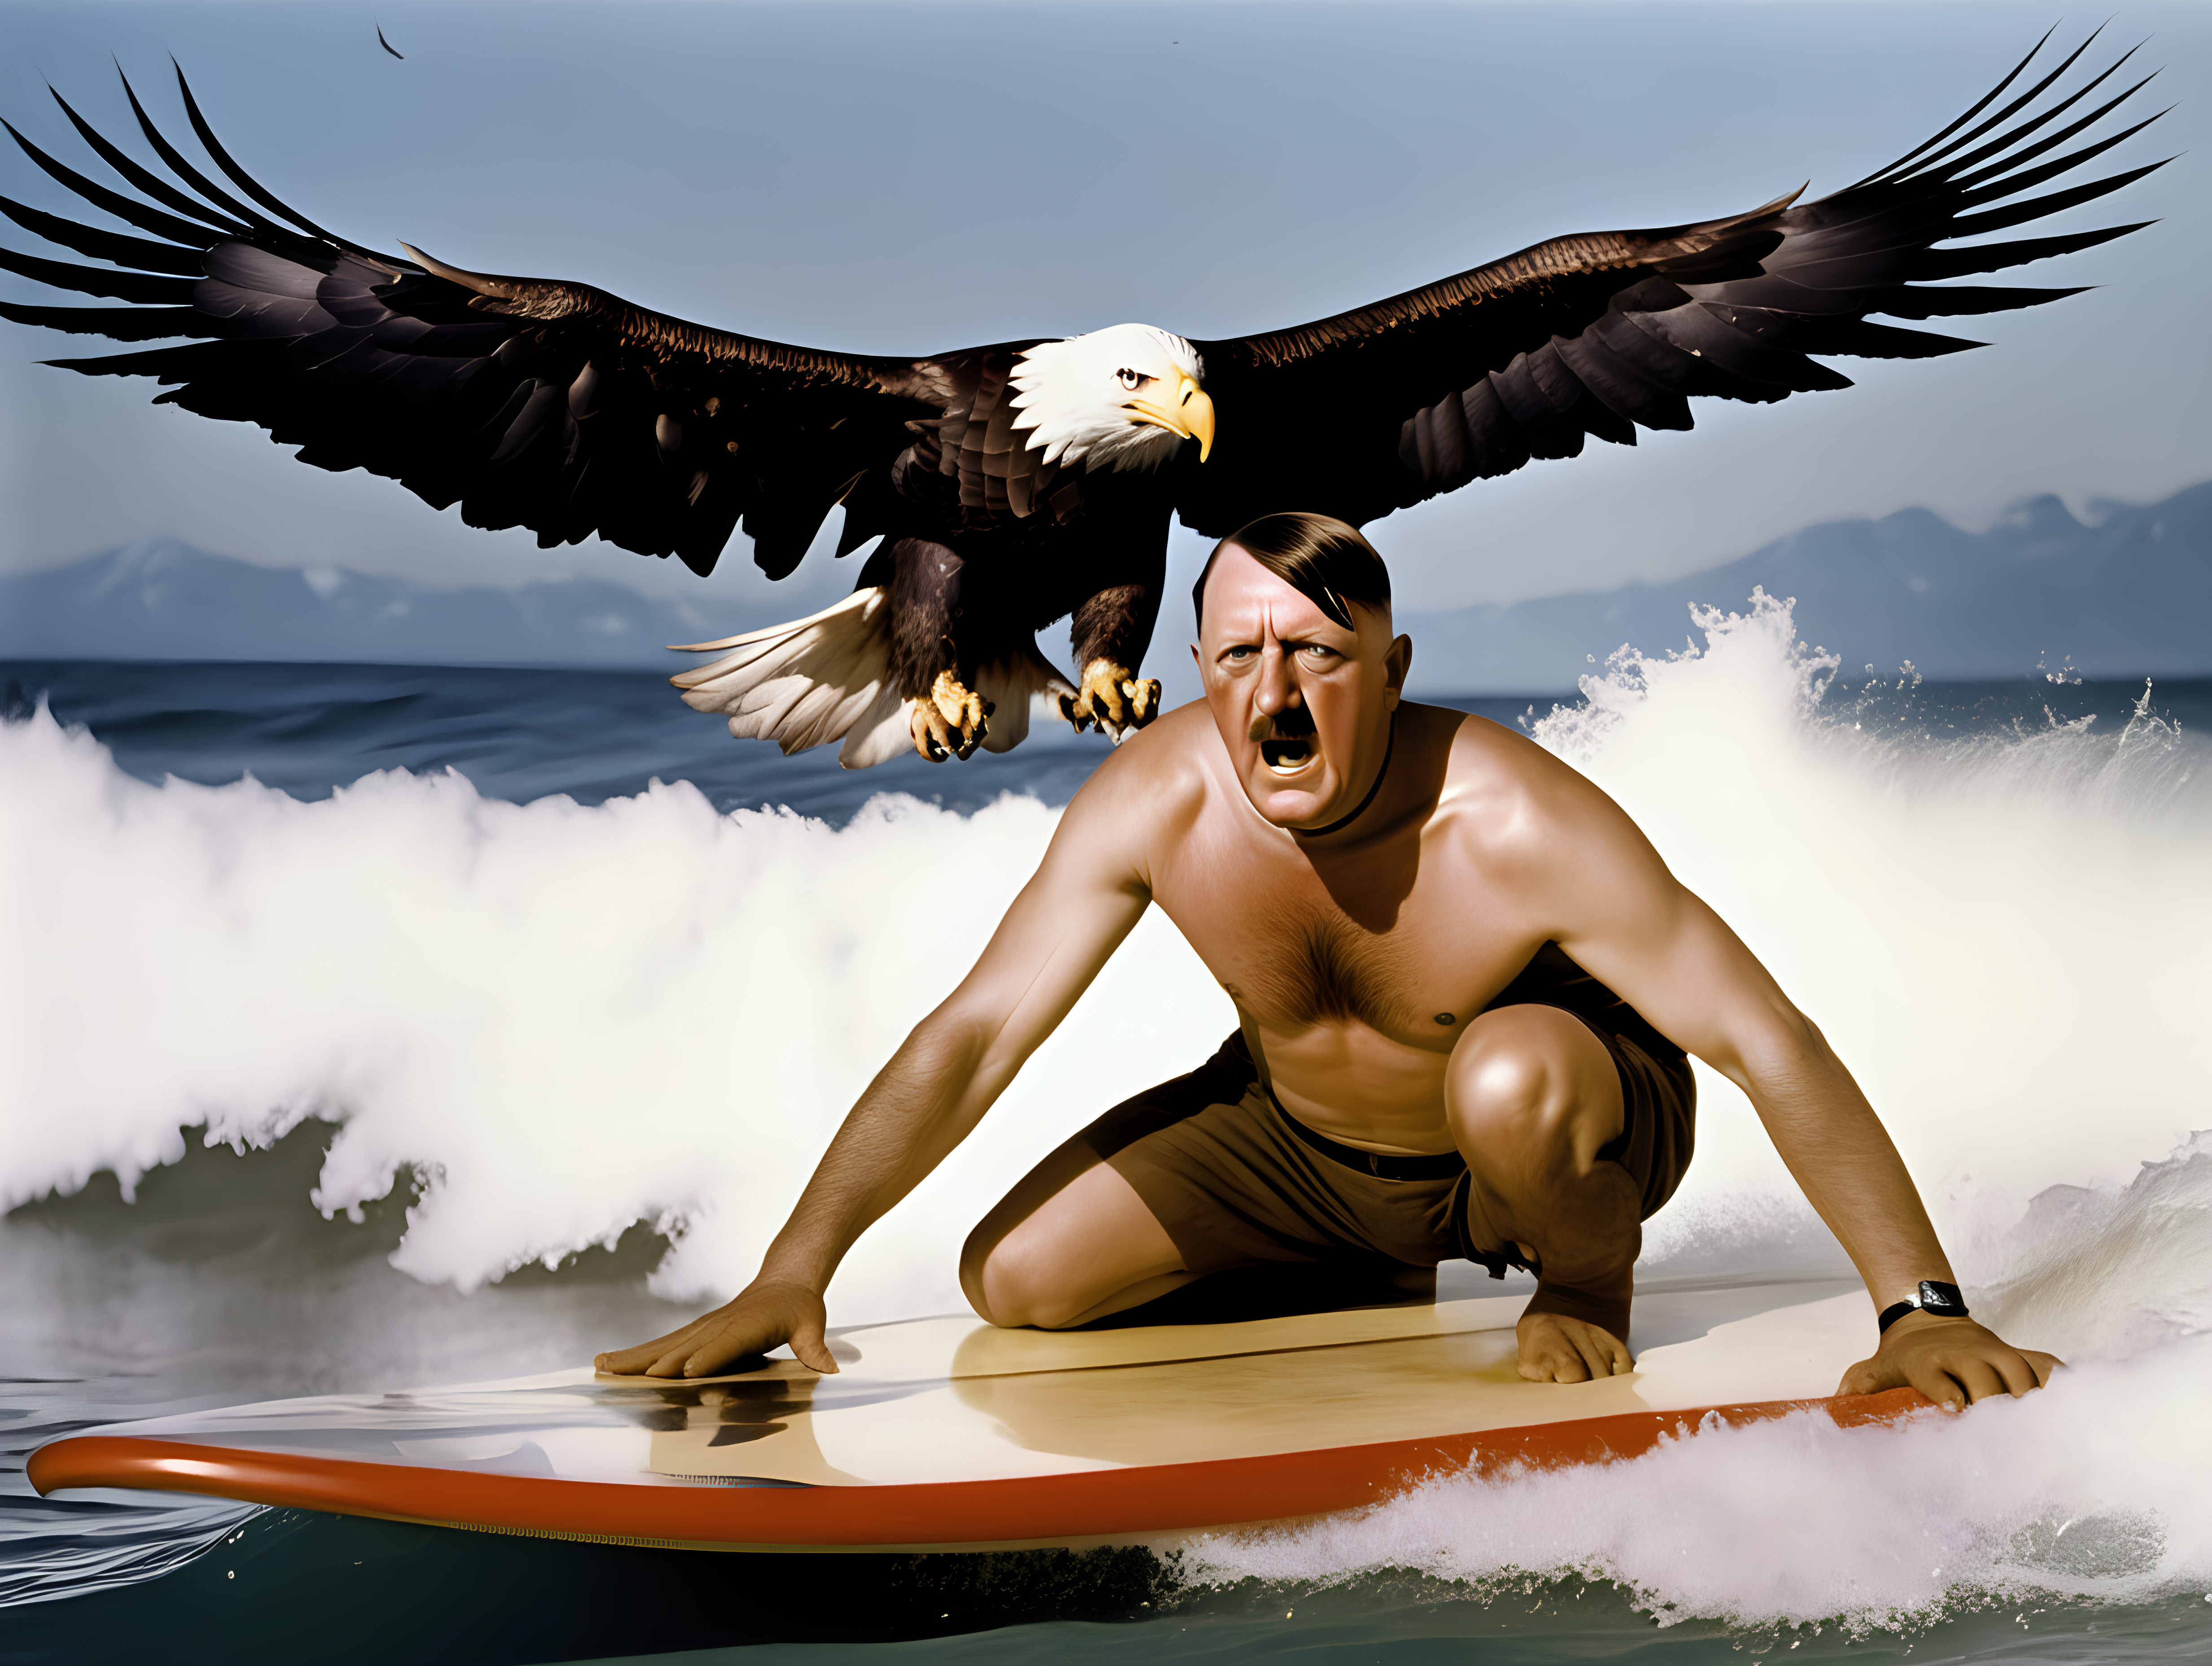 Hitler on a surfboard attacked by bald eagles